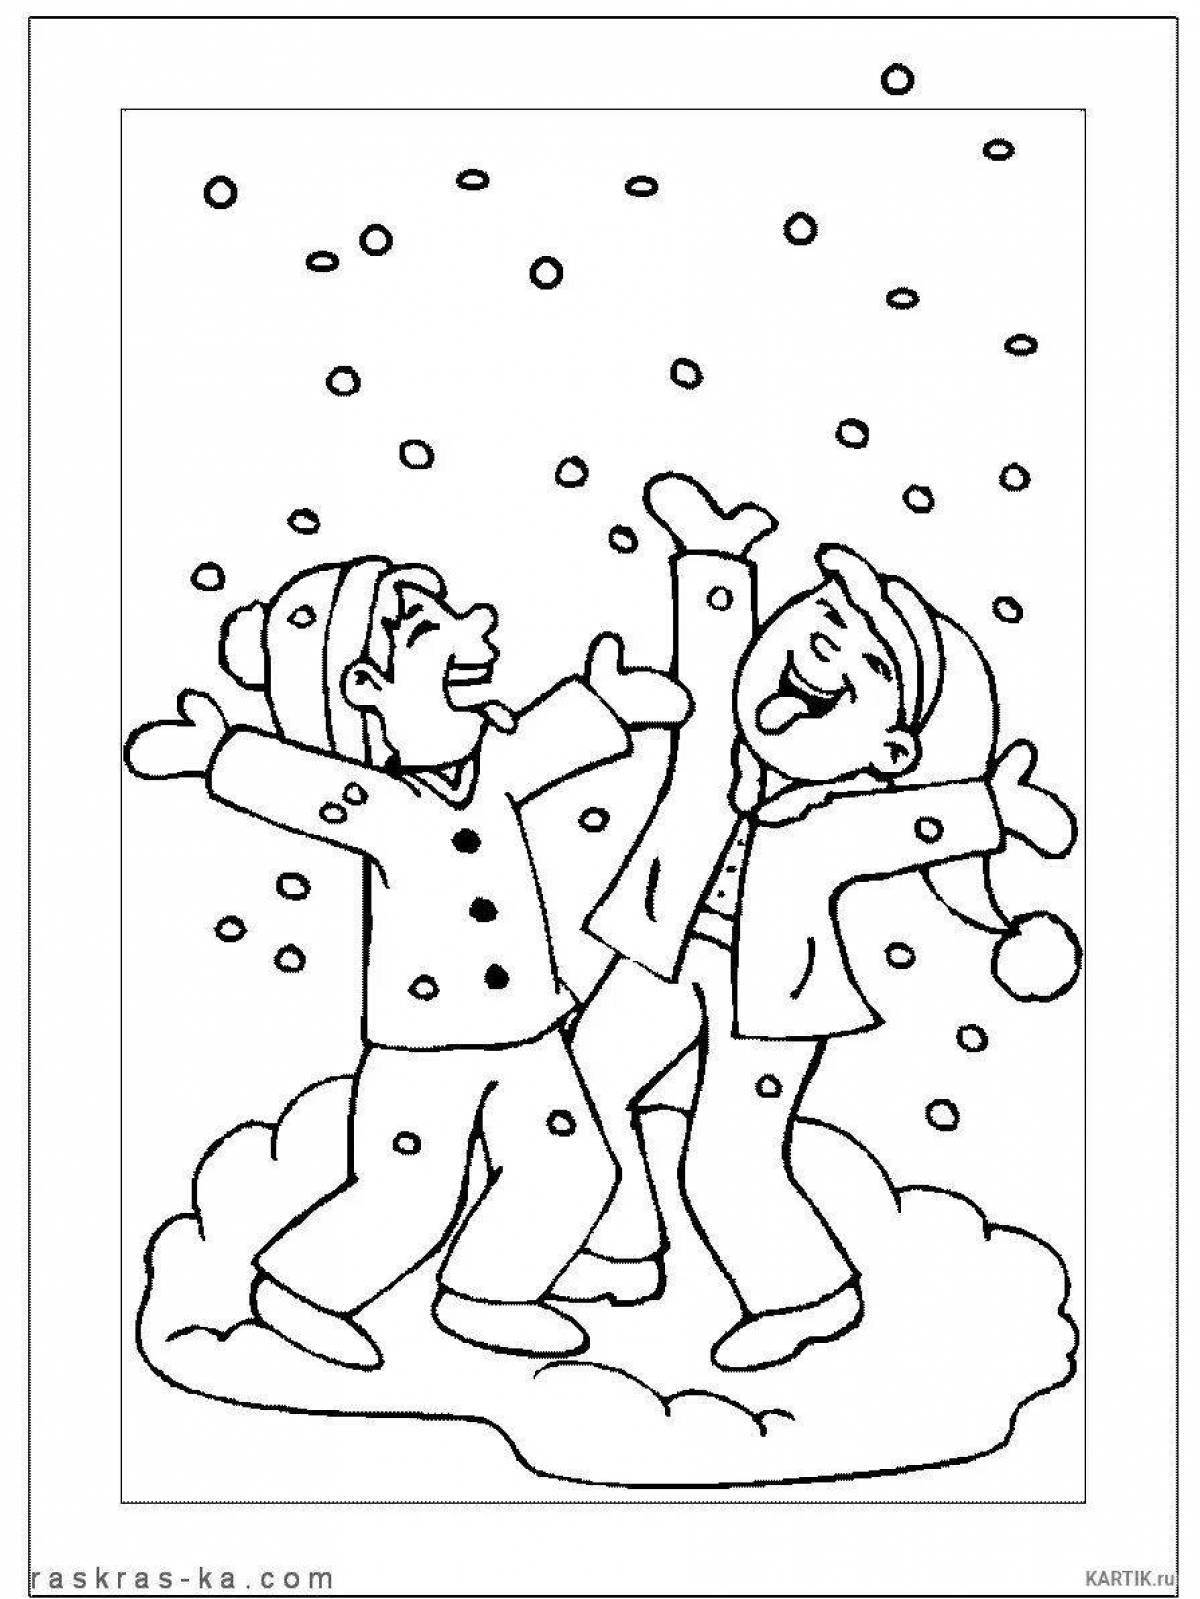 Snowing glitter coloring book for kids